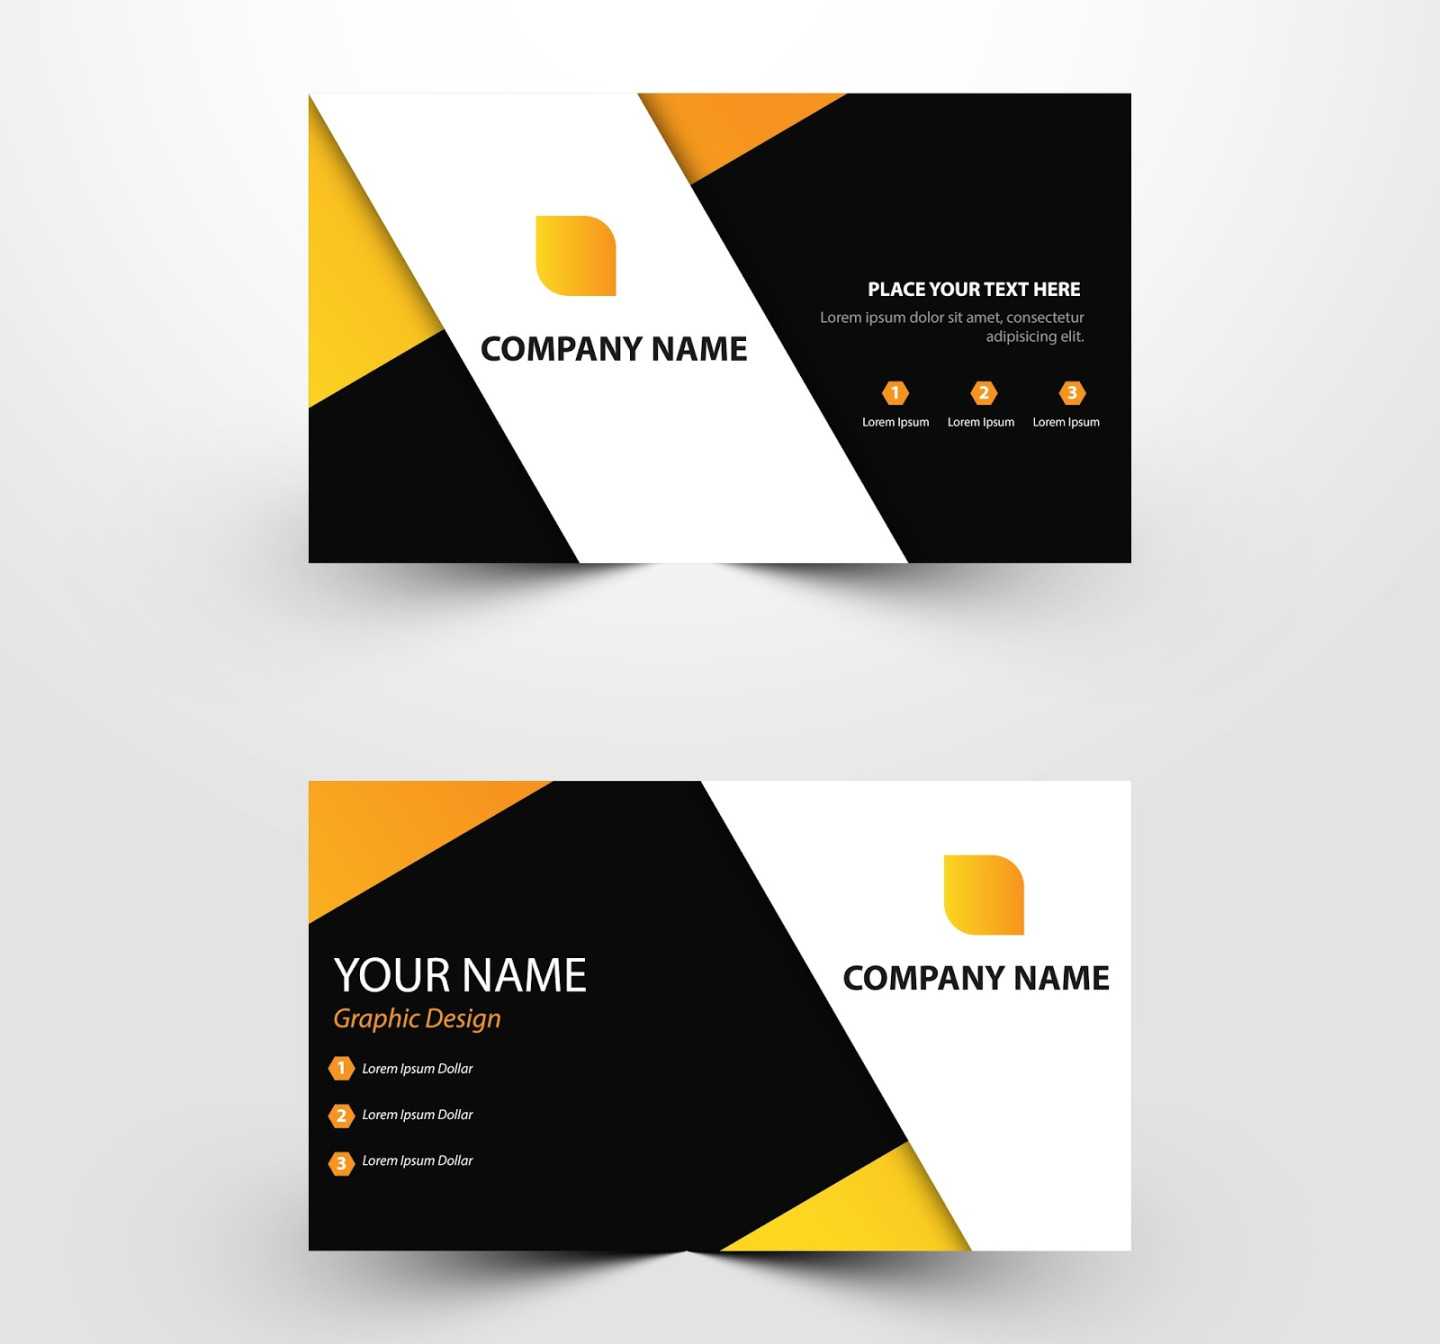 Complimentary Download: Professional Business Card Templates In PSD Format